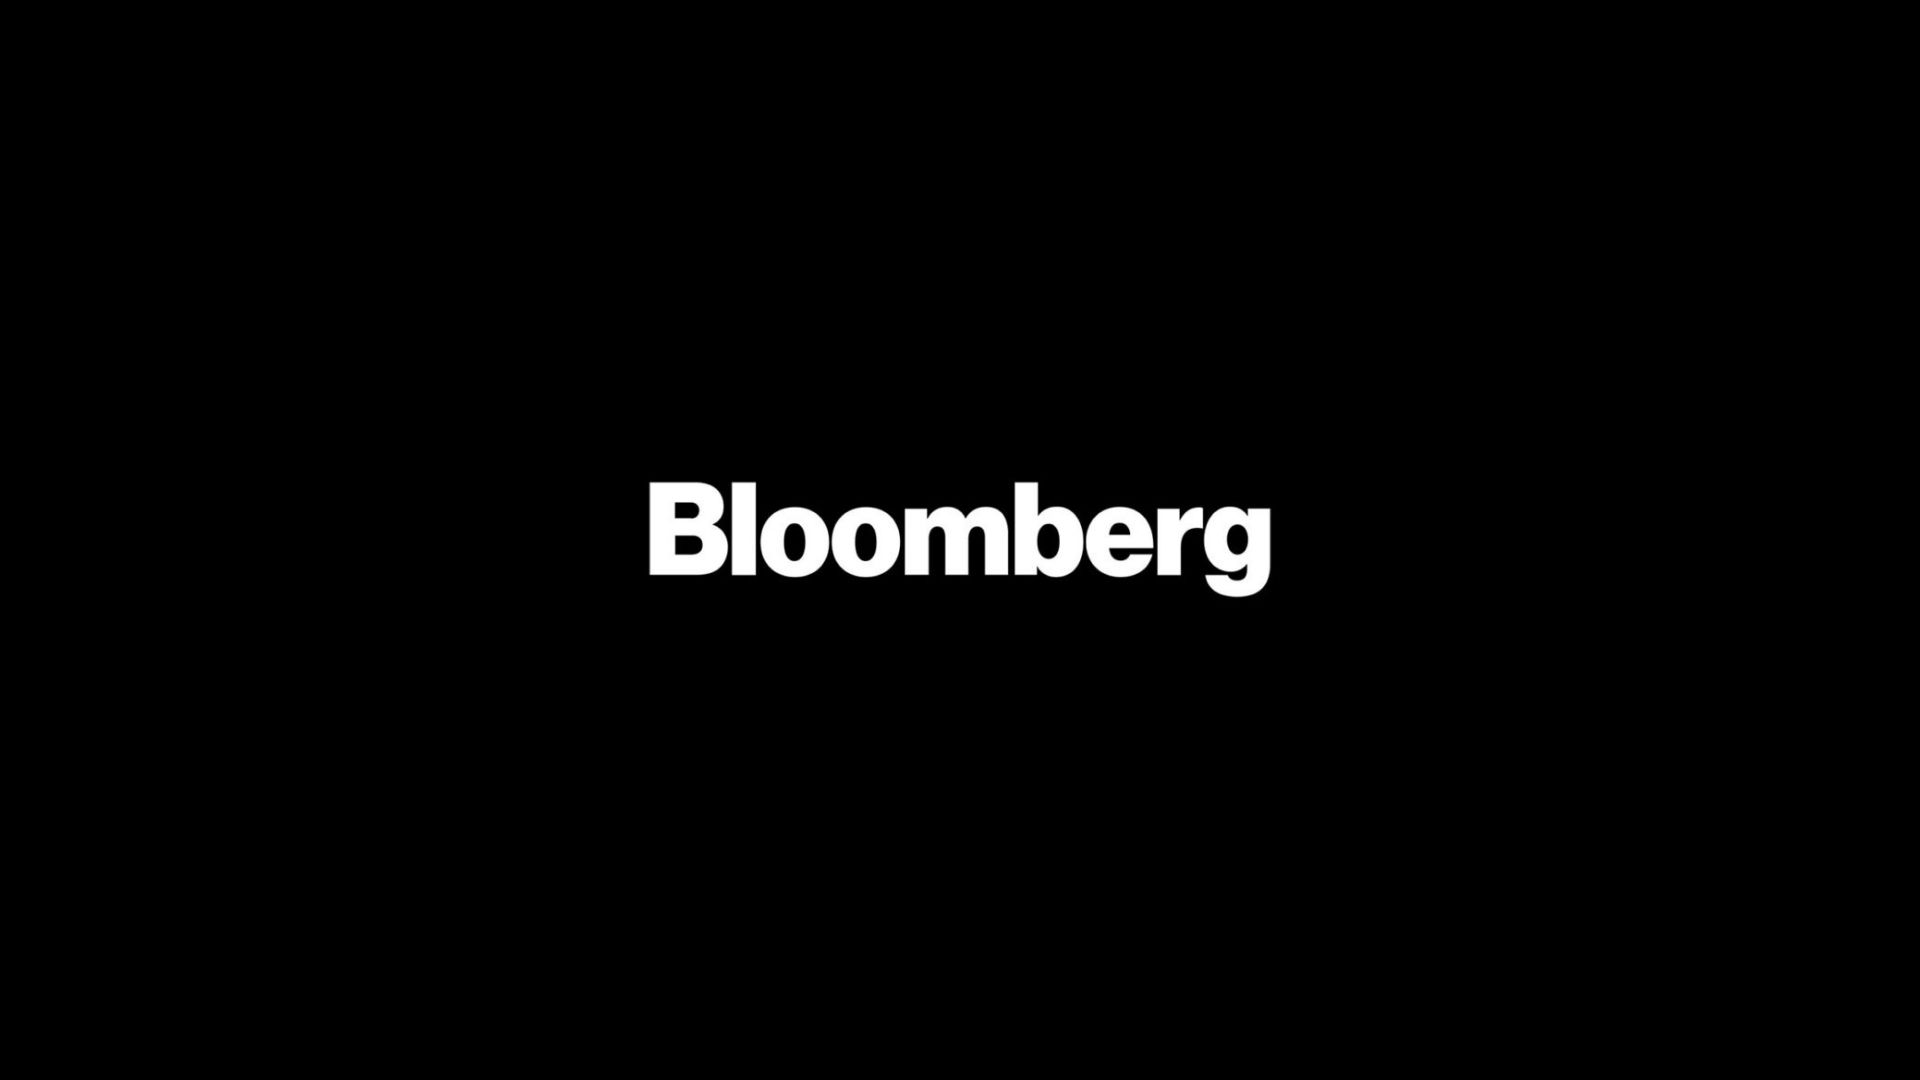 Bloomberg: SPAC Rush Leads Active ETF to Go All In on Blank-Check Companies